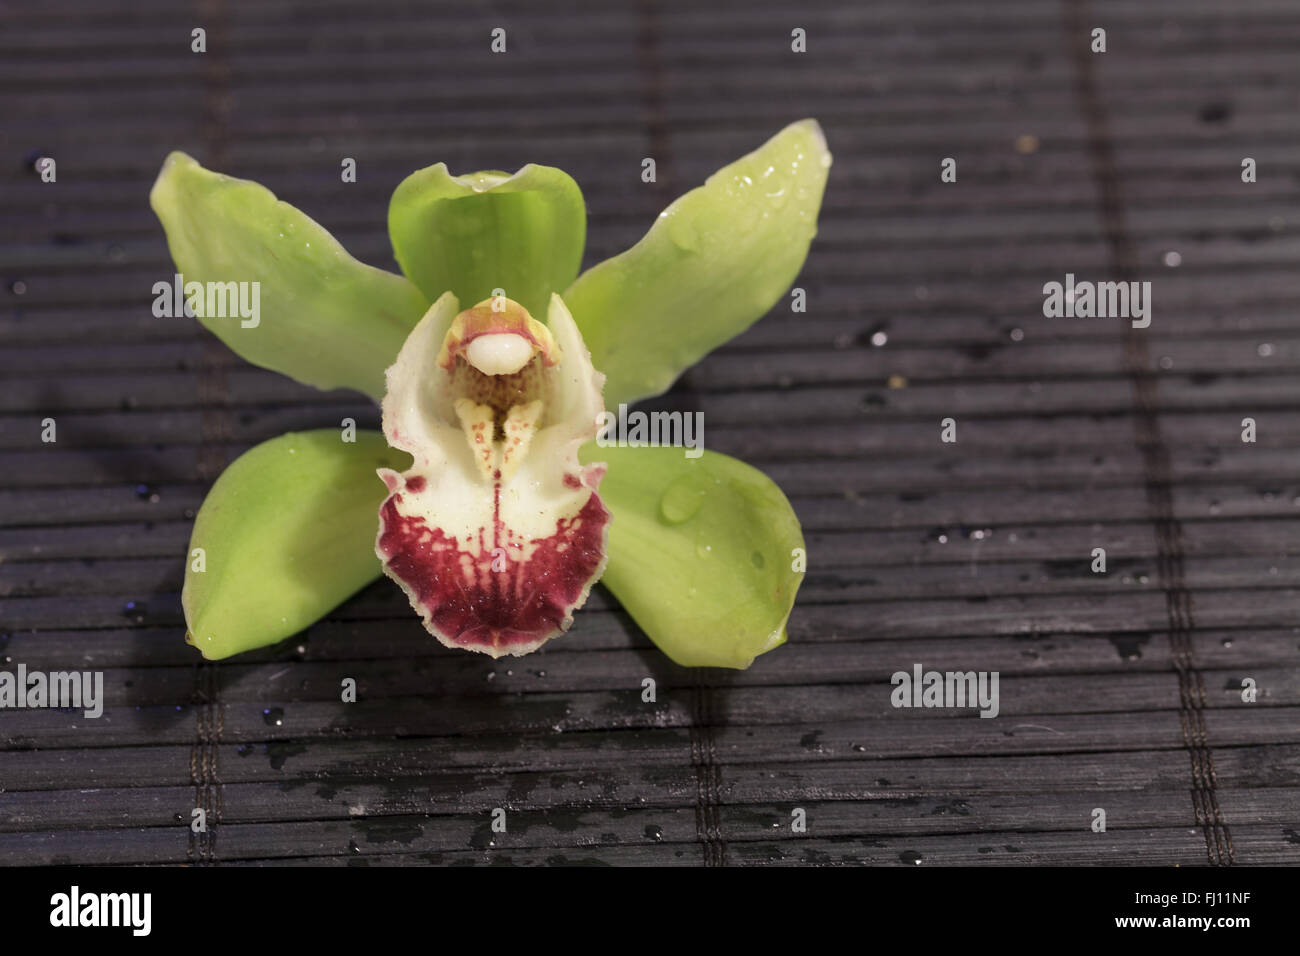 Green and red Cymbidium orchid species on a black bamboo mat background Stock Photo